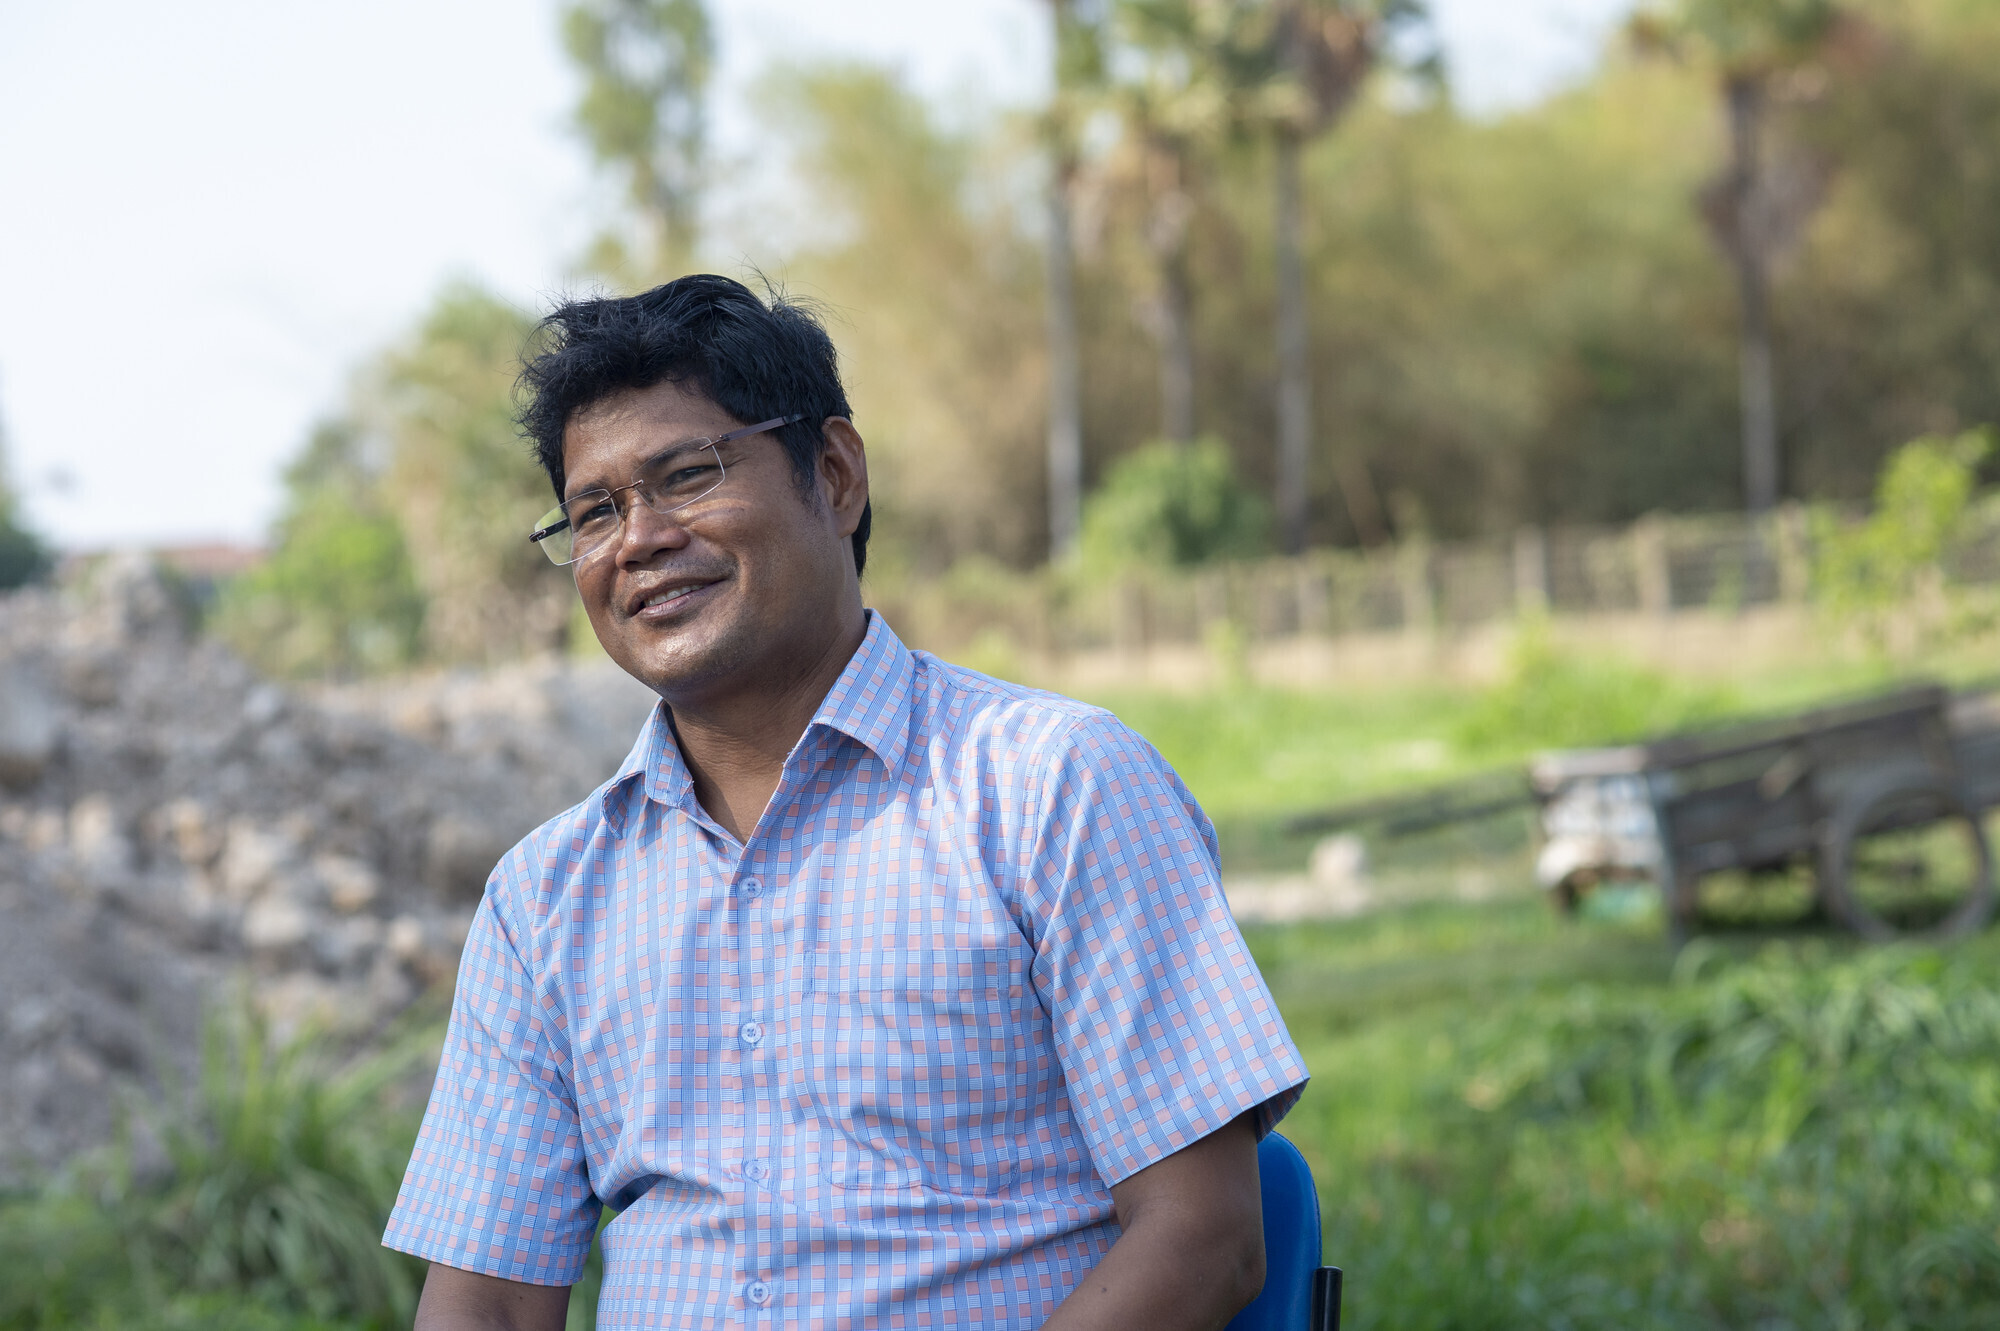 A protrait of a Cambodian man in a blue button-down shirt and glasses.